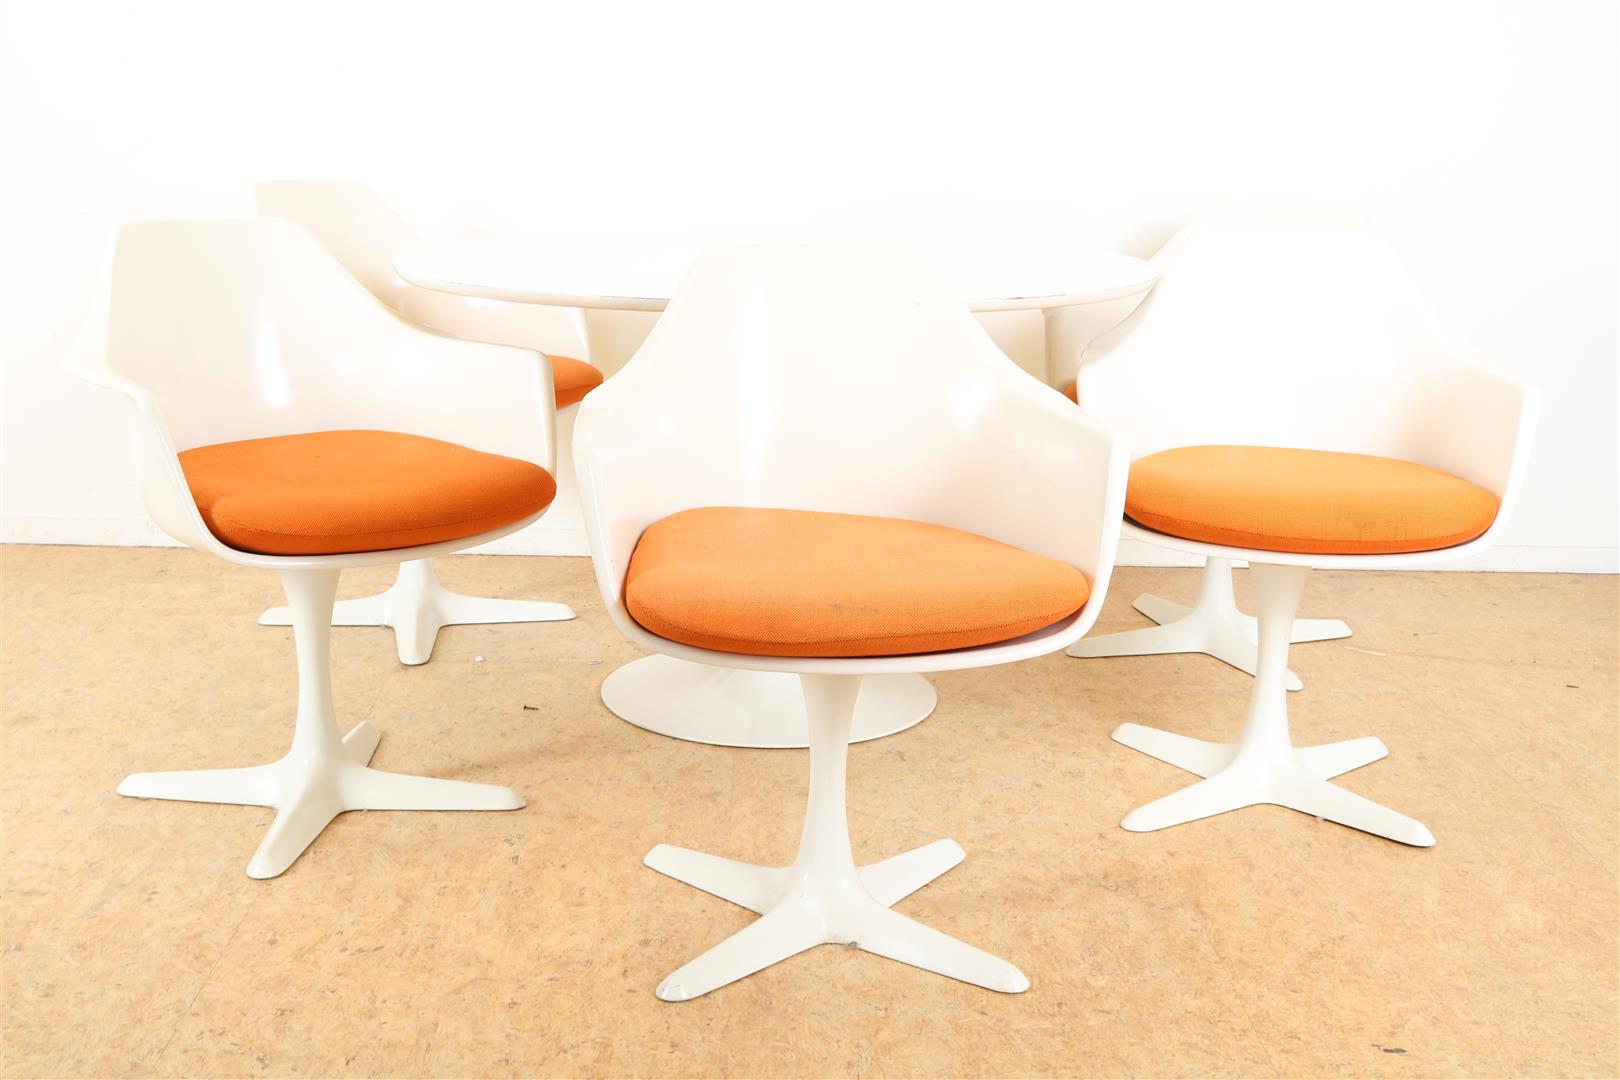 Series of 6 plastic Space Age design chairs with orange seat (user stains), marked Arkana and a